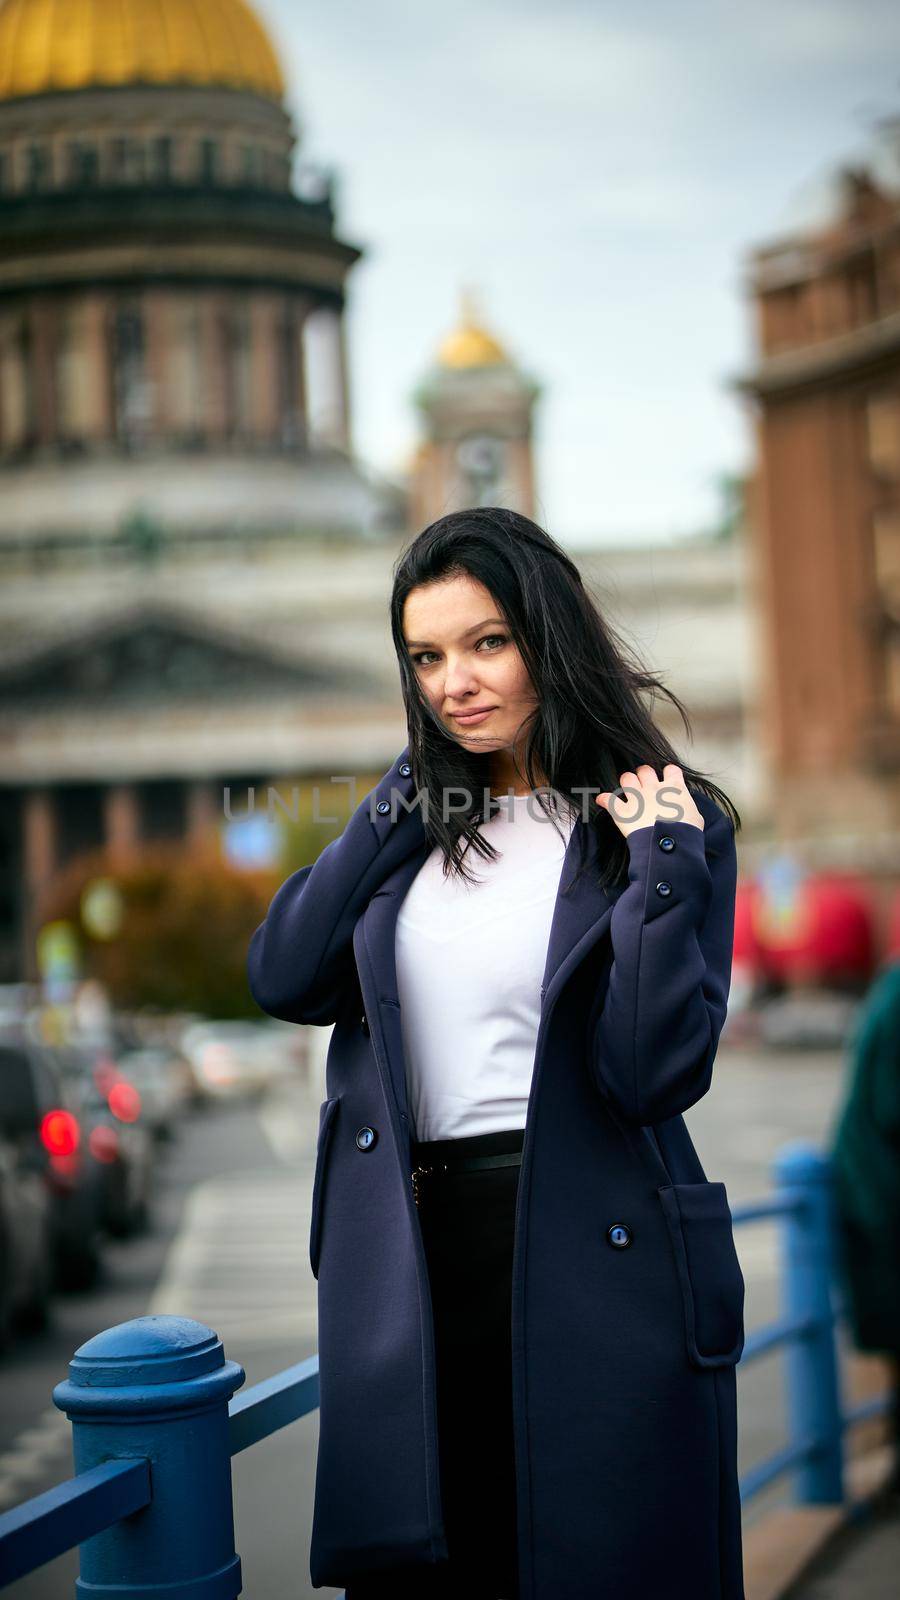 Charming thoughtful fashionably dressed woman with long dark hair travels through Europe, standing in city center of St. Petersburg, thoughtful woman with long dark hair wanders alone, vertical